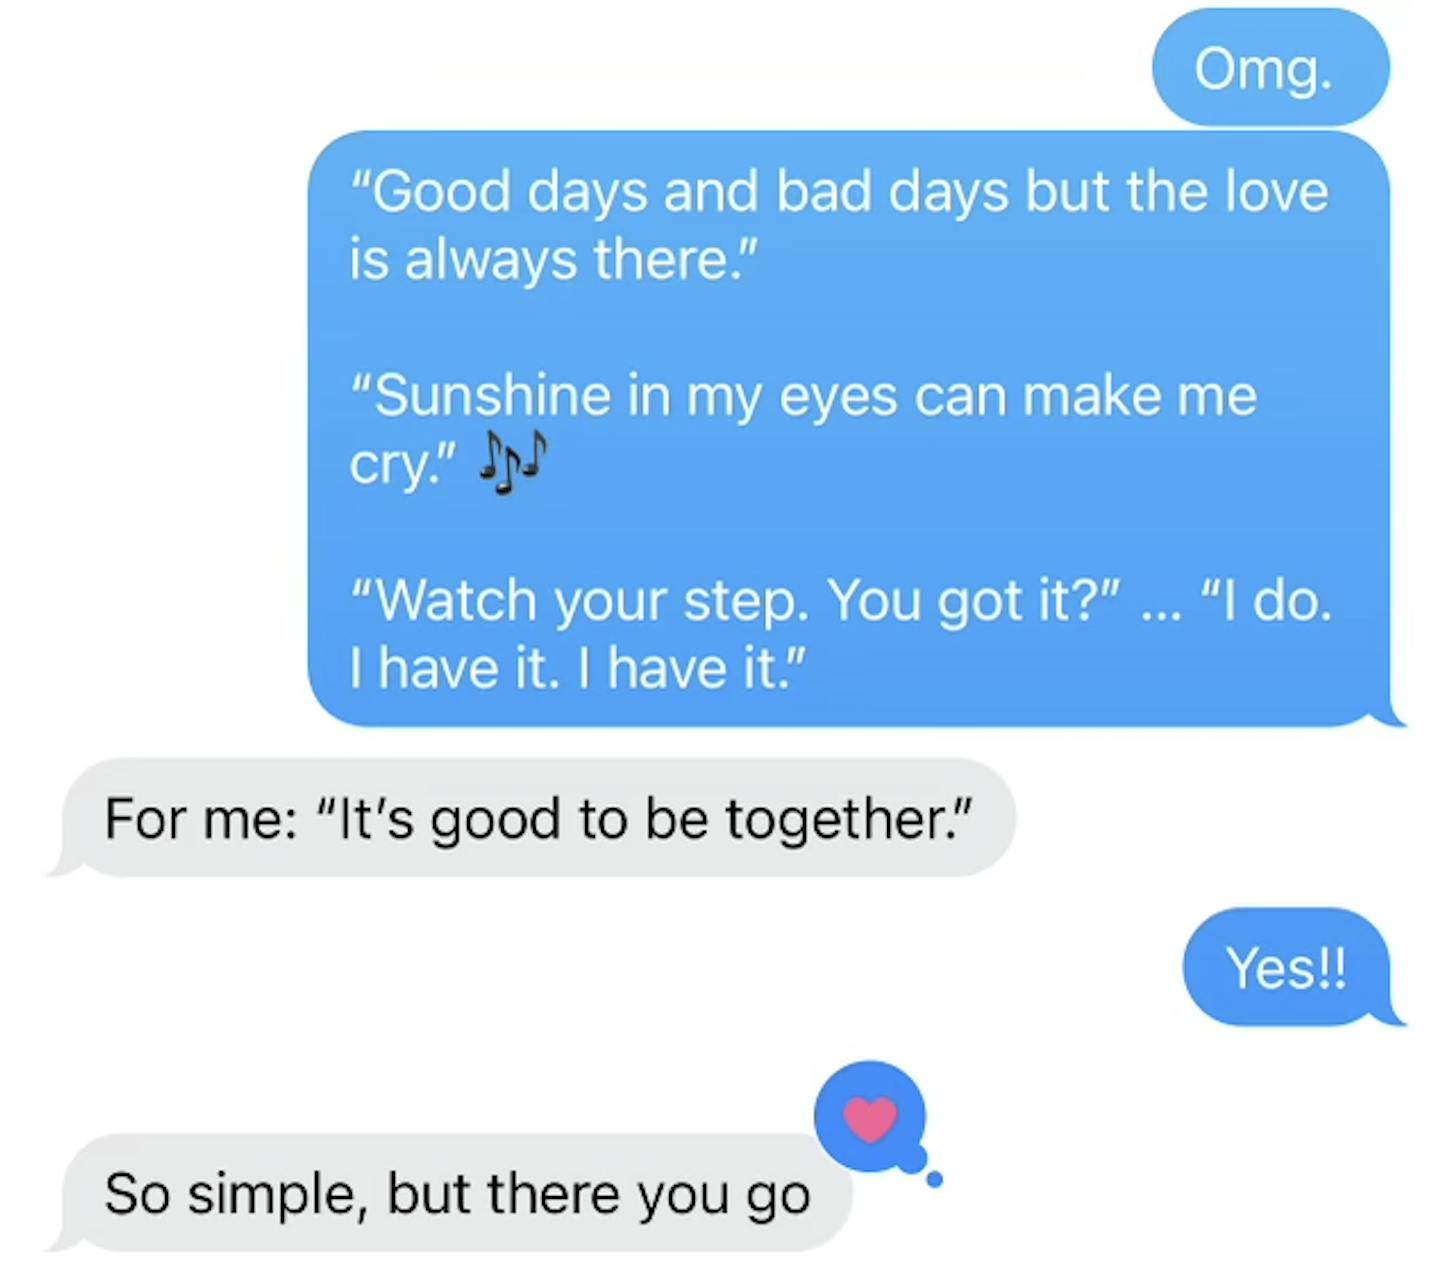 screenshot of text exchange with the words: "Julie Cooper: 	Omg.  	“Good days and bad days but the love is always there.”  “Sunshine in my eyes can make me cry.” 🎶   “Watch your step. You got it?” … “I do. I have it. I have it.”  Brett Cooper: 	For me: “It’s good to be together.”  Julie Cooper: 	Yes!!  Brett Cooper: 	So simple, but there you go"